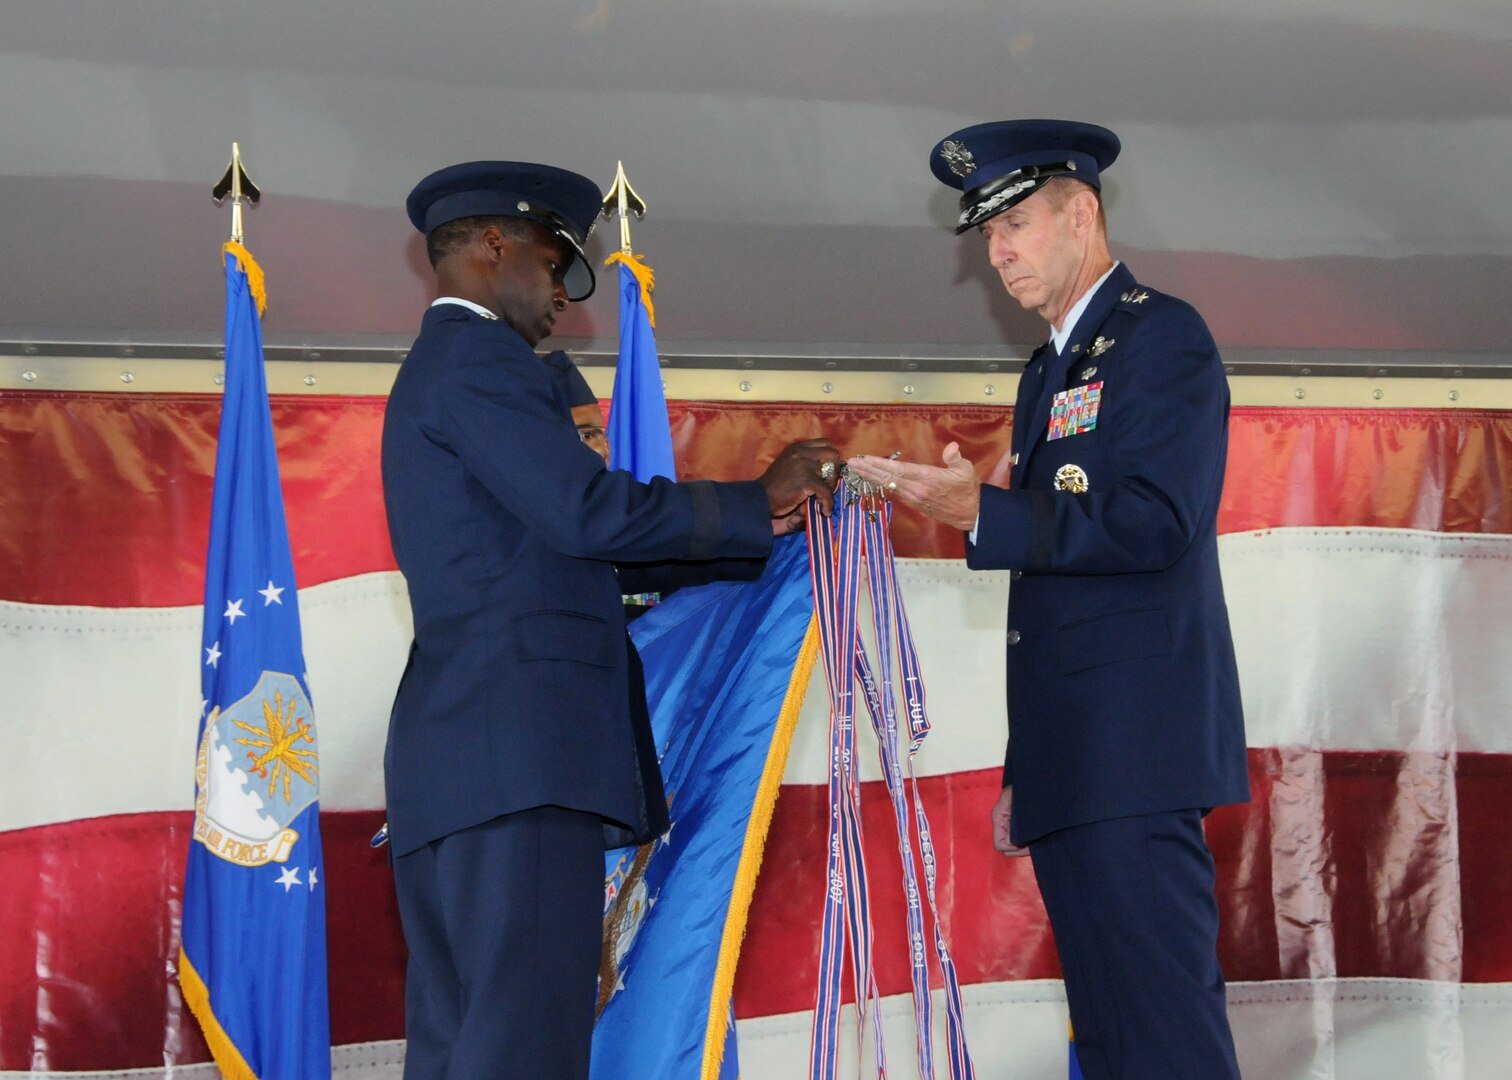 Gen. Edward A. Rice Jr. (left) Air Education and Training Command commander, and Maj. Gen. Mark Solo, 19th Air Force commander, places the outstanding unit award streamer on the 19th AF flag at the inactivation ceremony held at Joint Base San Antonio-Randolph, Texas, July 12. (U.S. Air Force photo by Melissa Peterson)